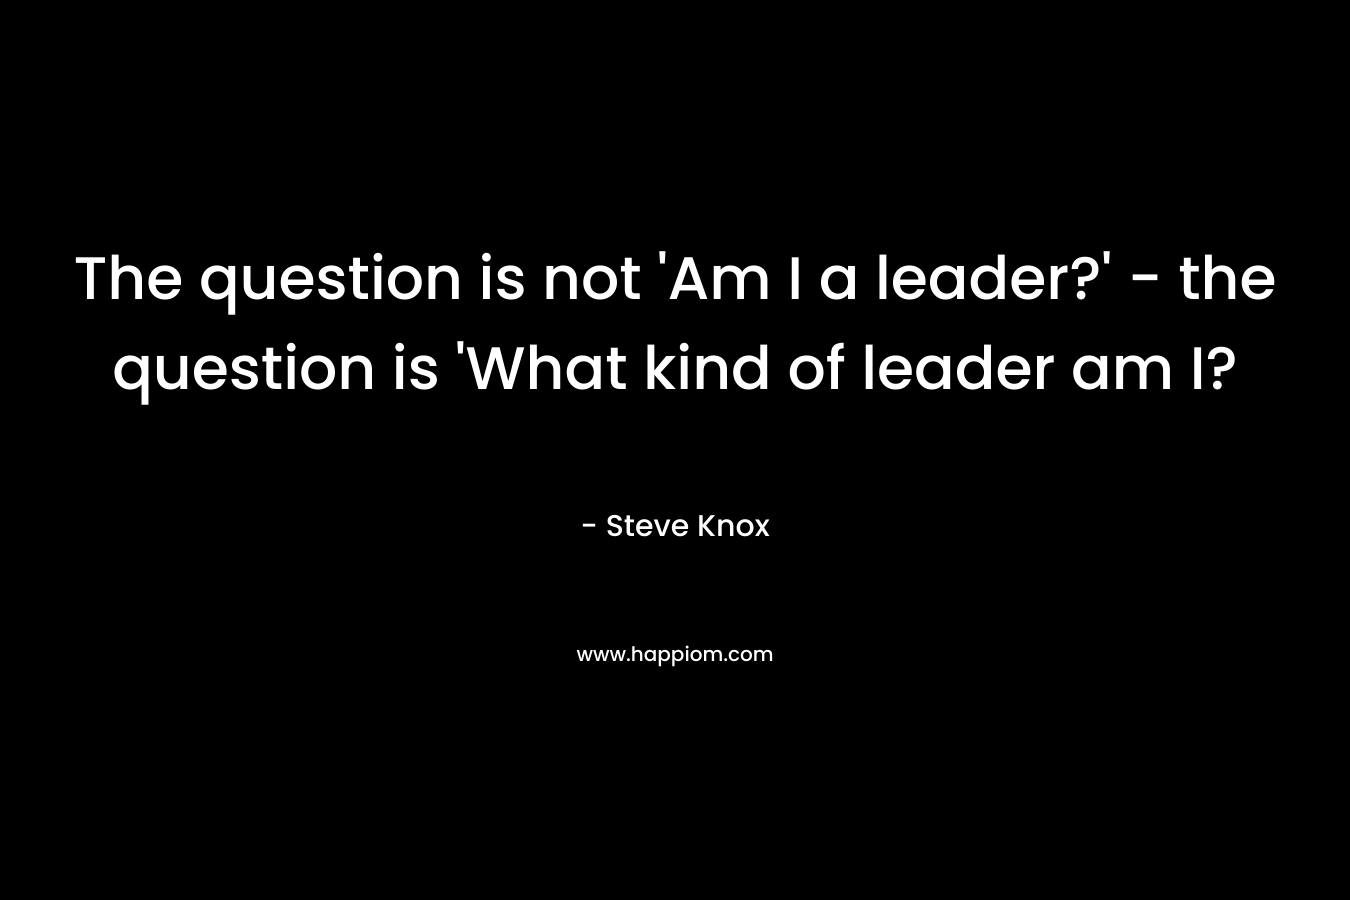 The question is not 'Am I a leader?' - the question is 'What kind of leader am I?